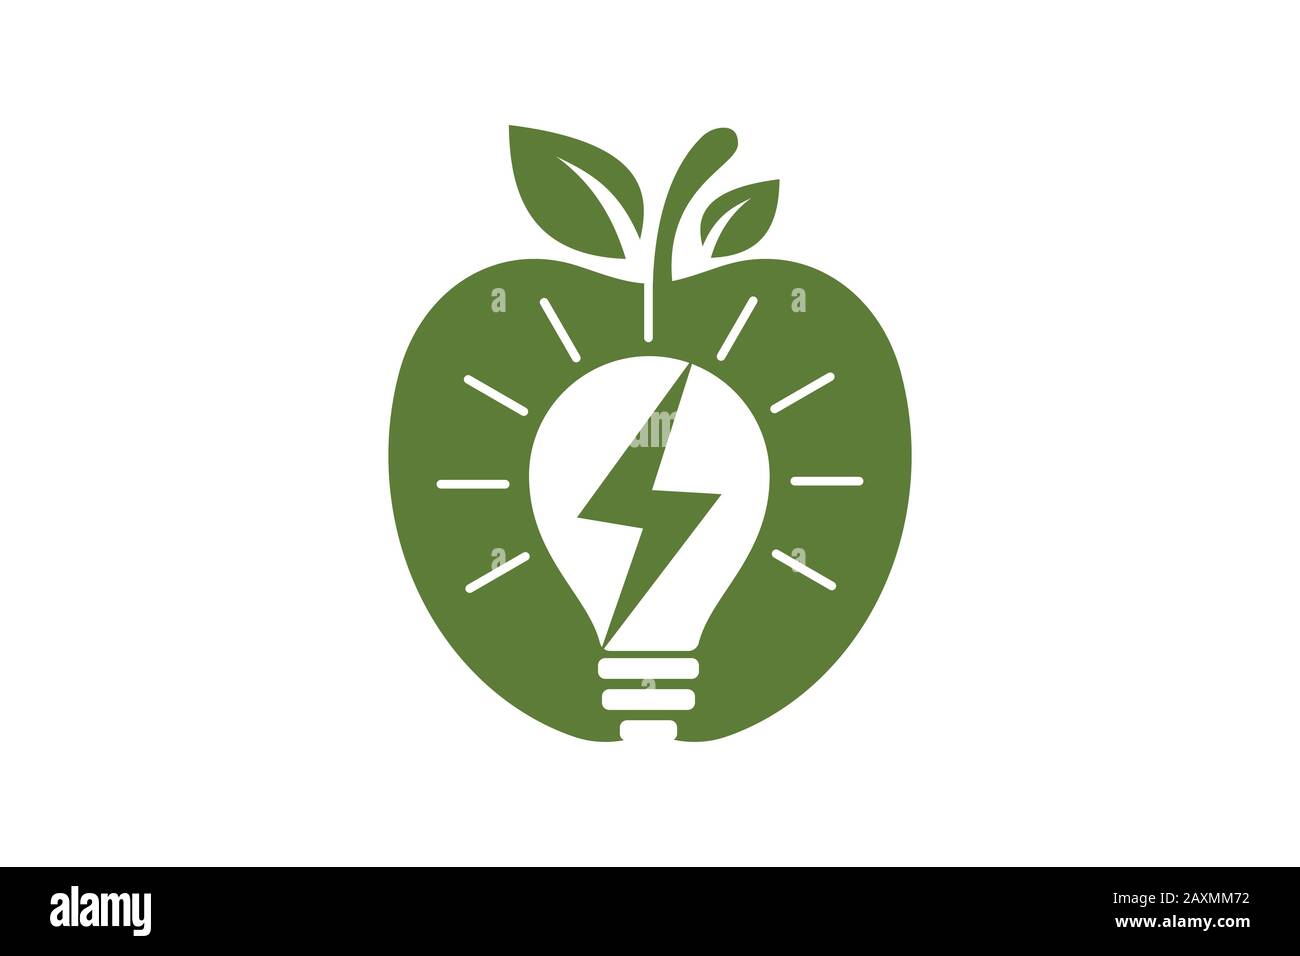 Apple and electricity logo sign symbol in flat style on white background Stock Vector